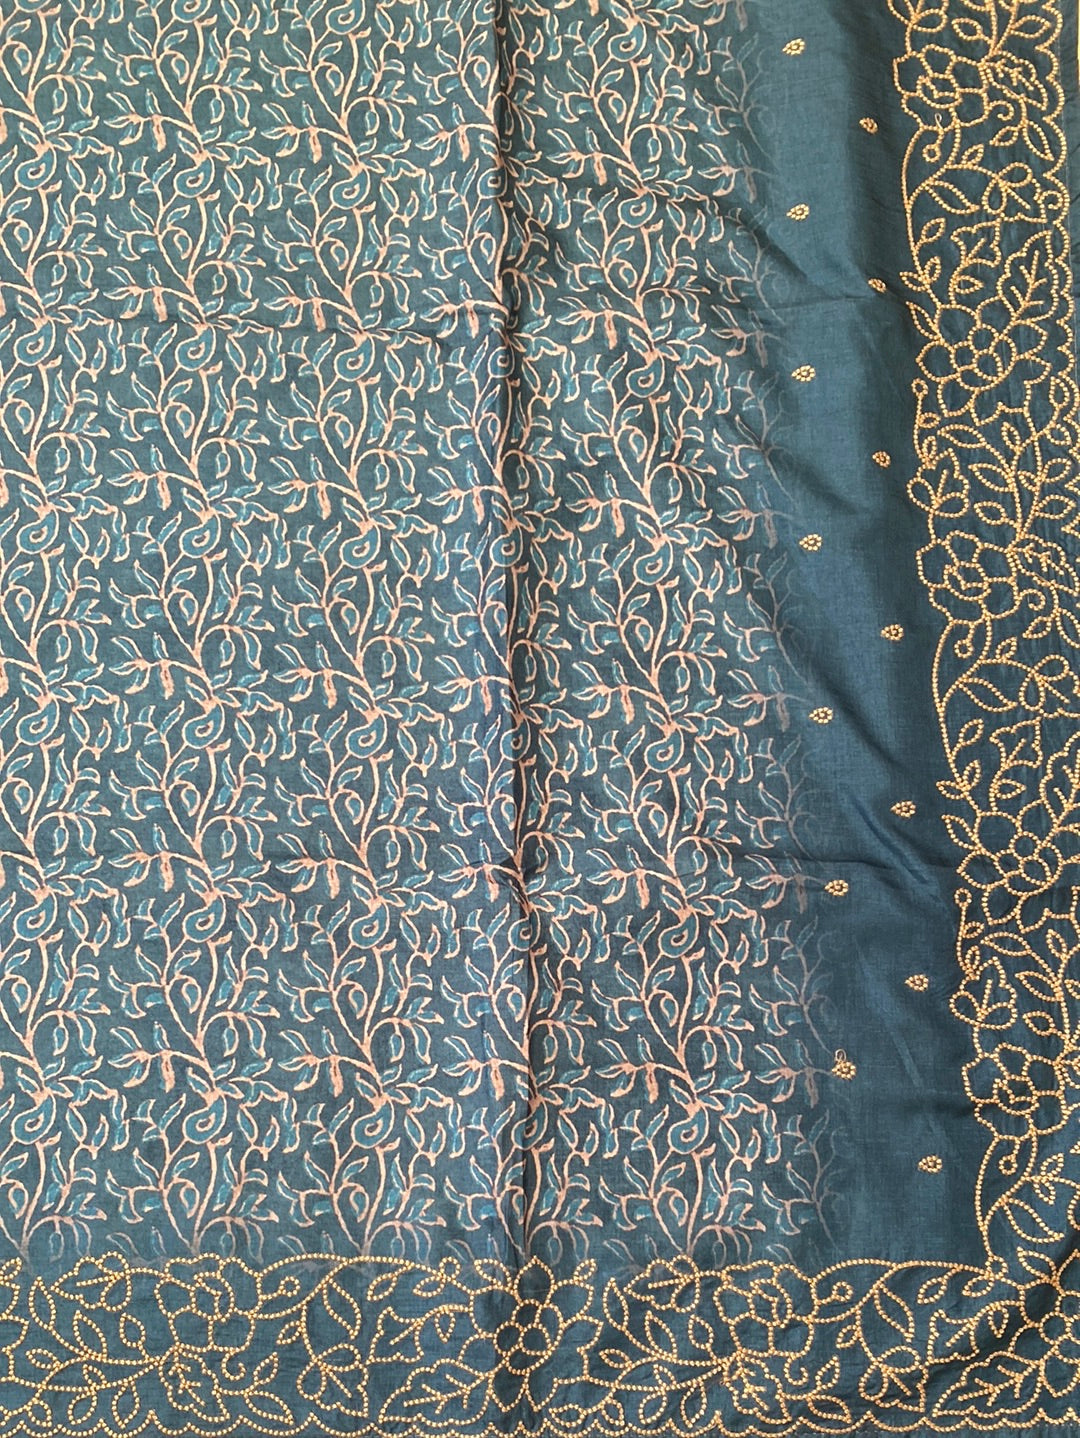 Tussar Embroidery/Kantha Work